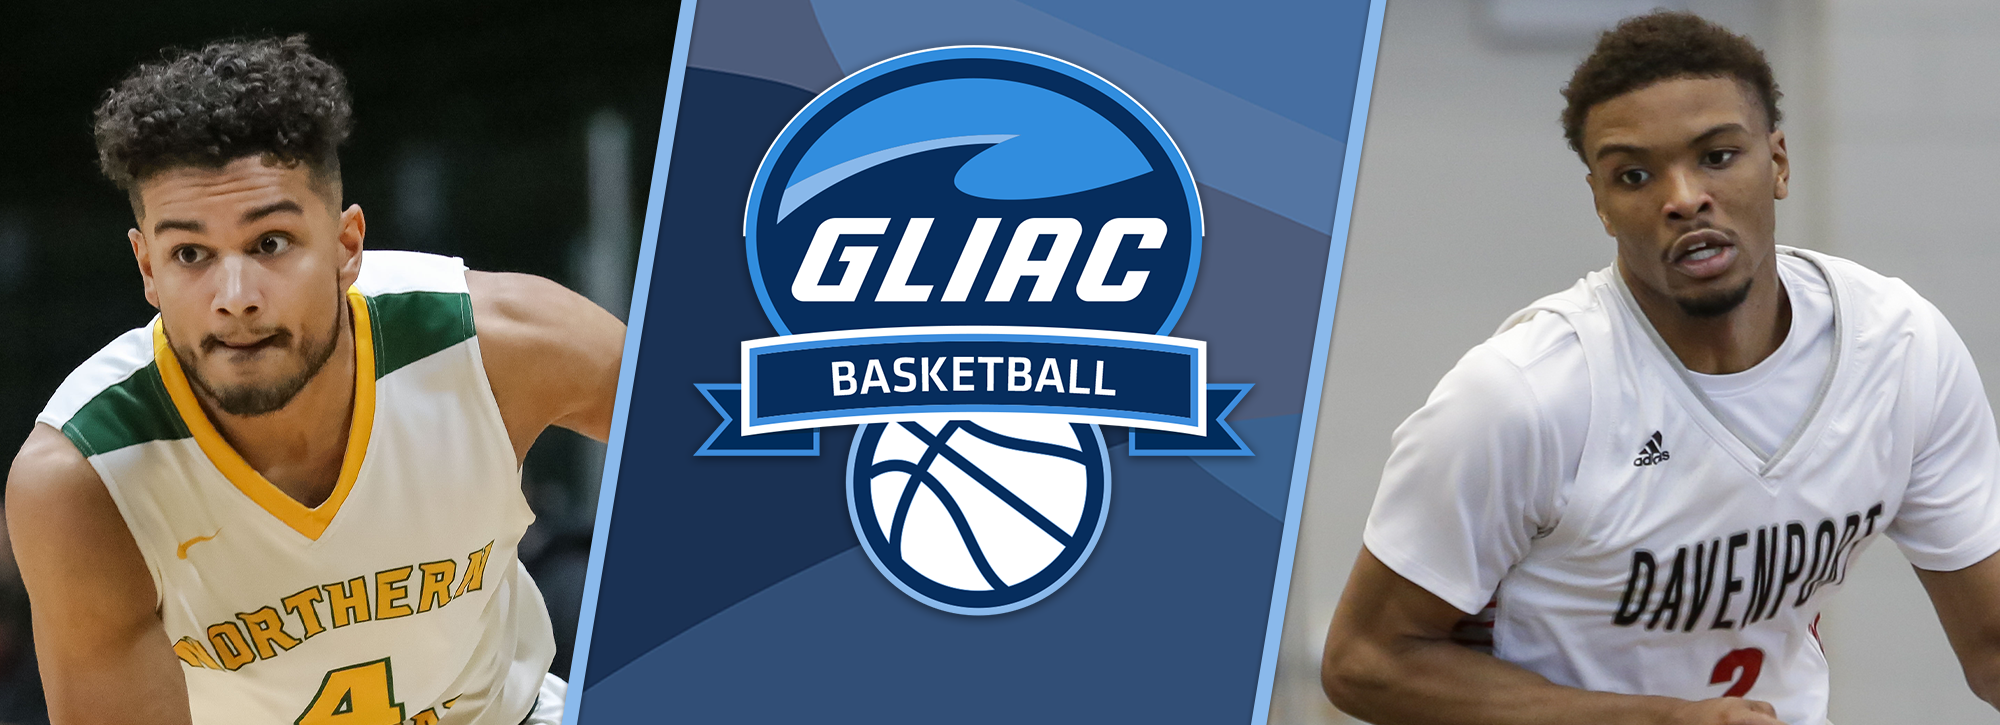 NMU's Bjorklund and DU's Rollins selected GLIAC Men's Basketball Players of the Week